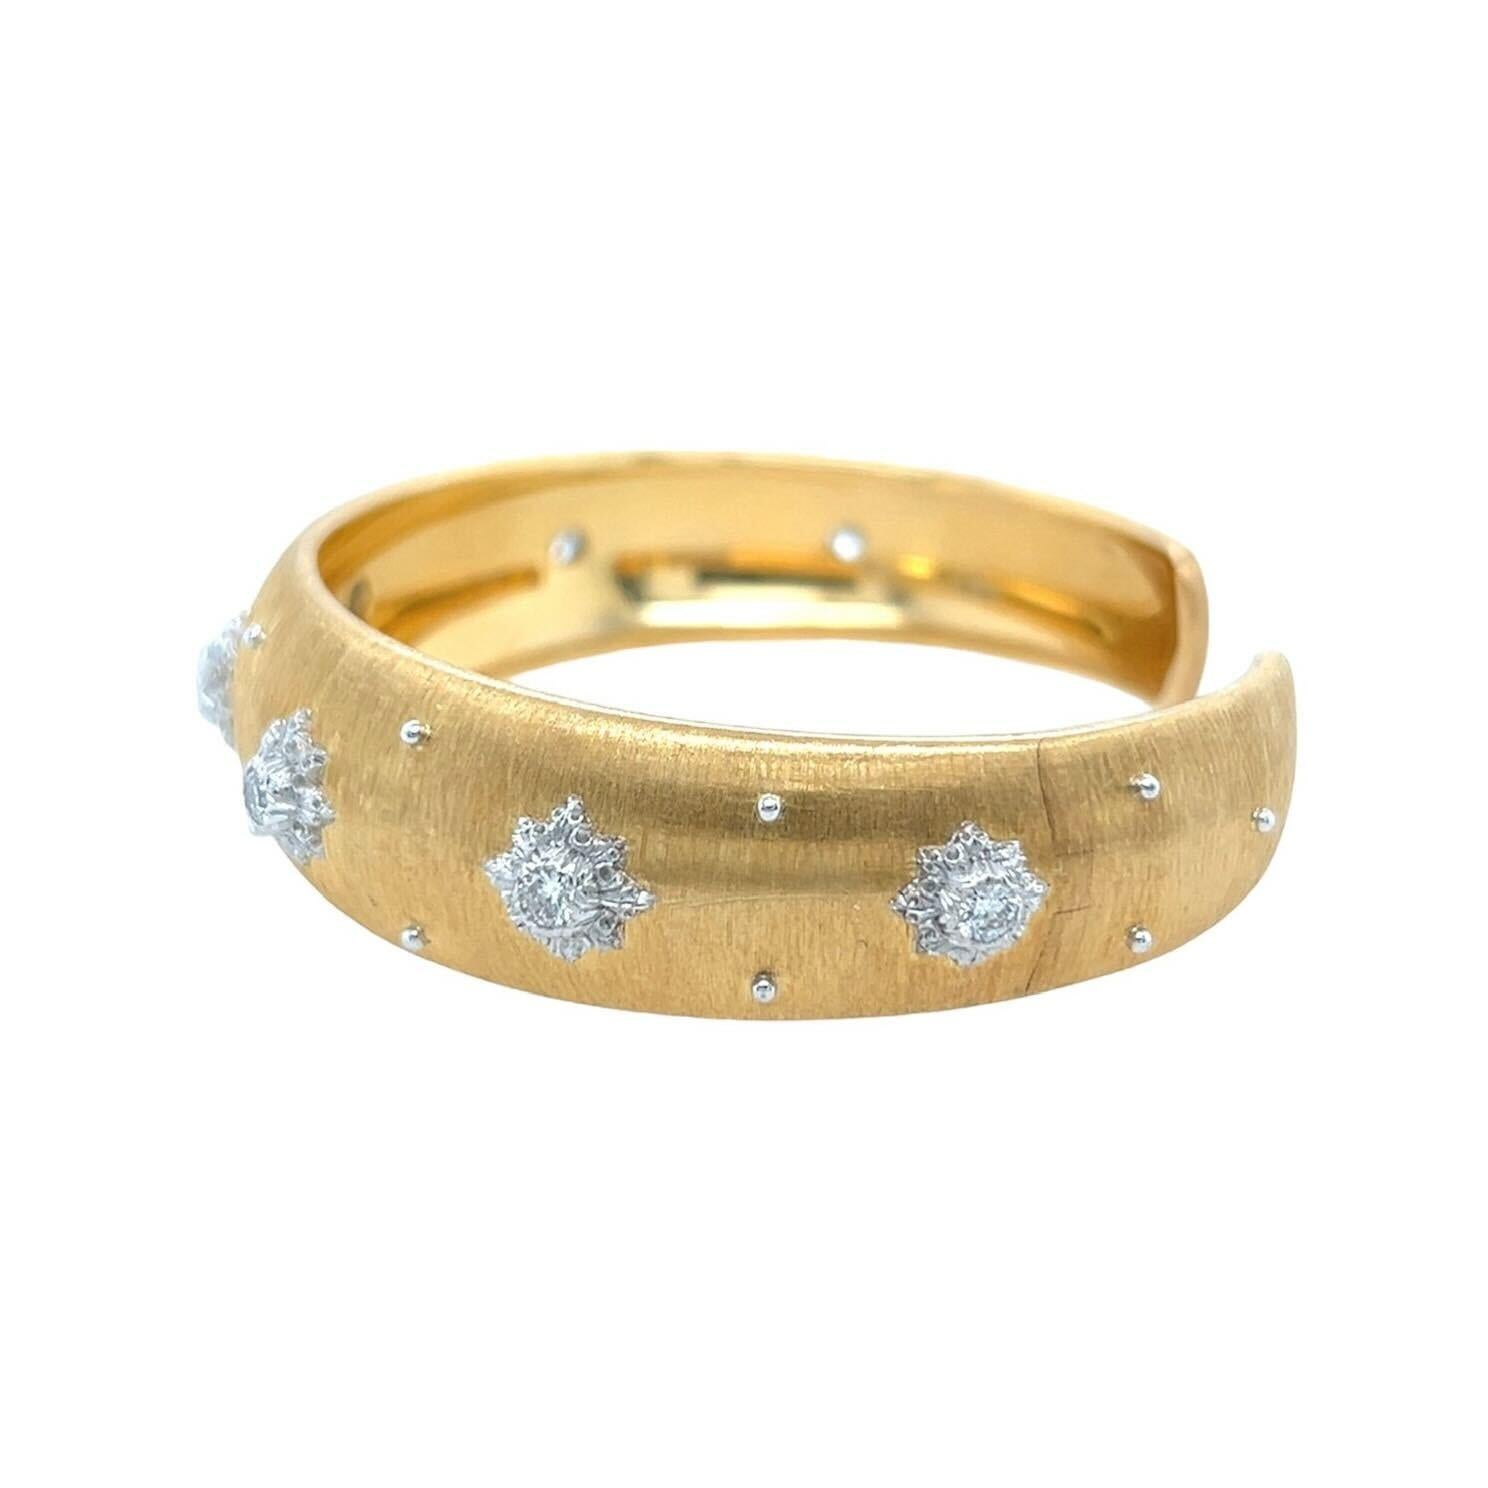 An 18 karat yellow and white gold and diamond bracelet, Buccellati.  The “Macri” bracelet designed as a hinged brushed yellow gold cuff applied with seven  rosettes of white gold, each set with a brilliant cut diamond, further decorated with